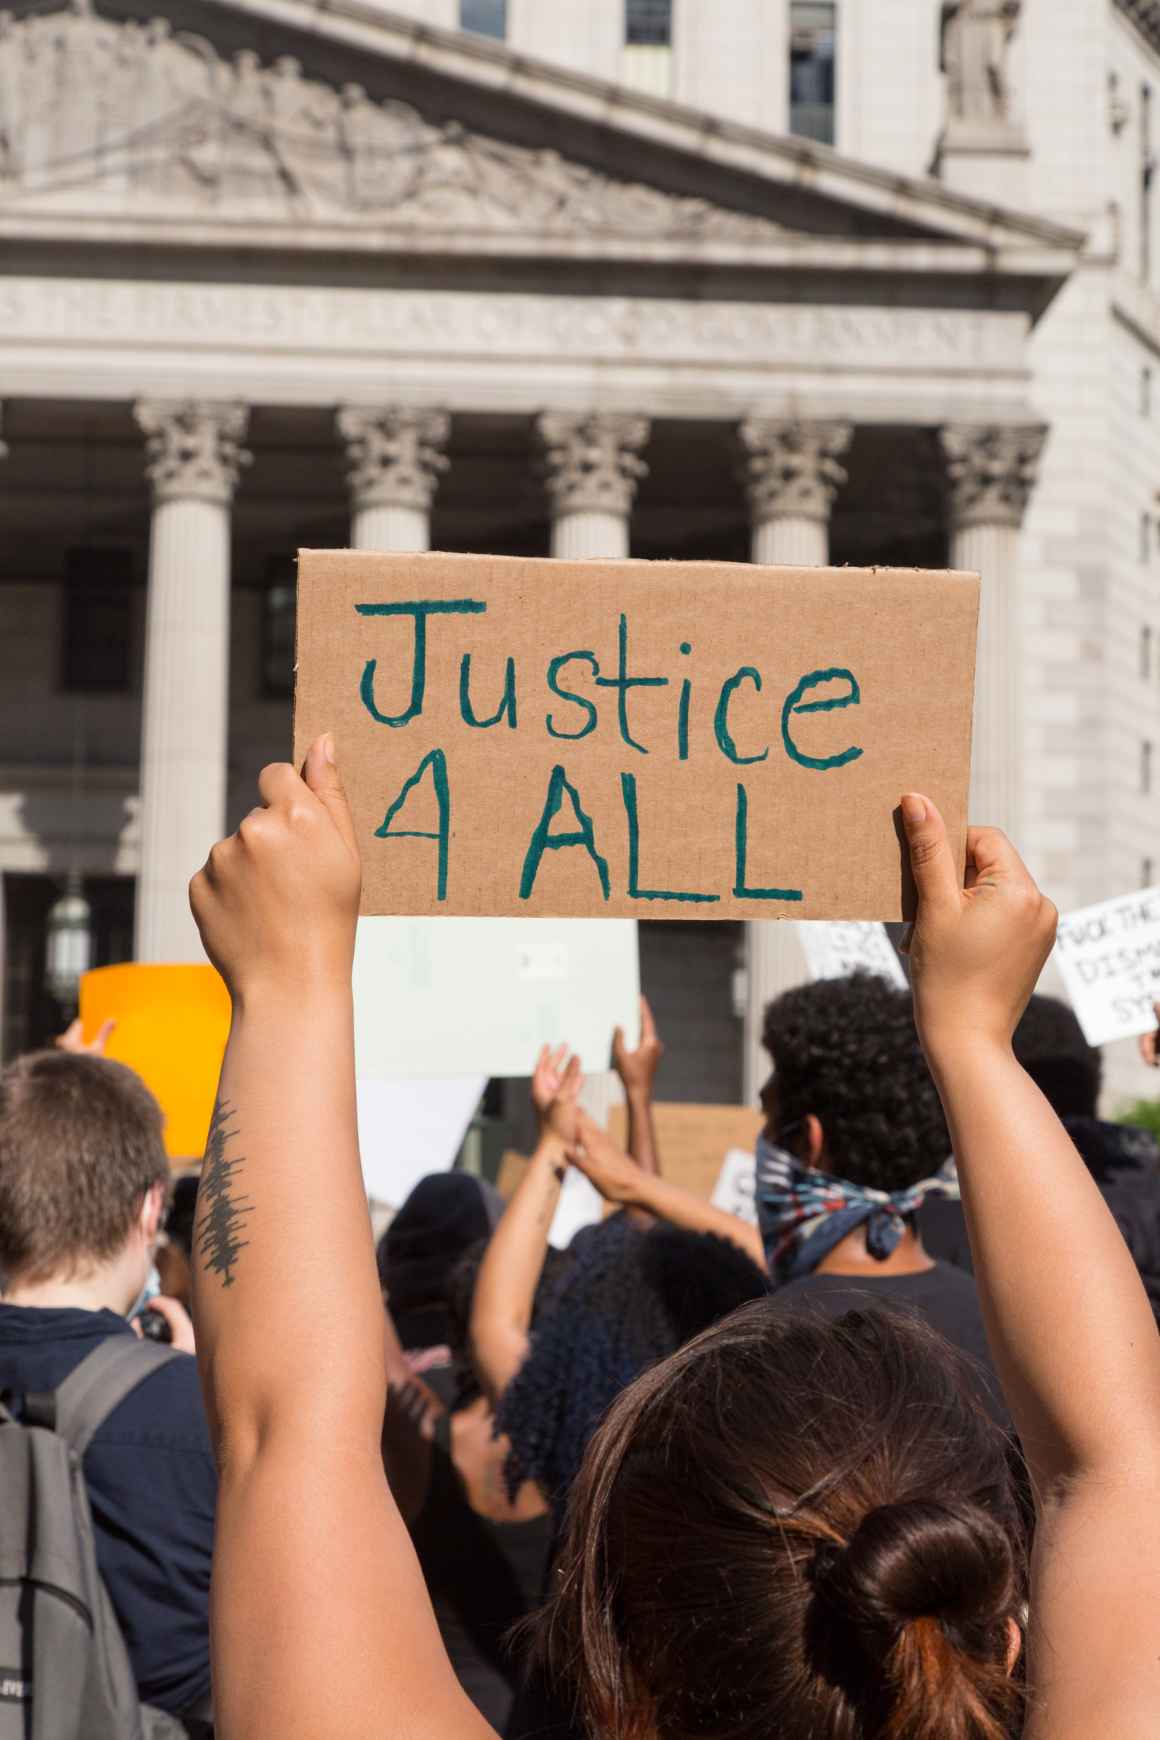 Hands holding up a sign with word "Justice 4 ALL" in front of a court house